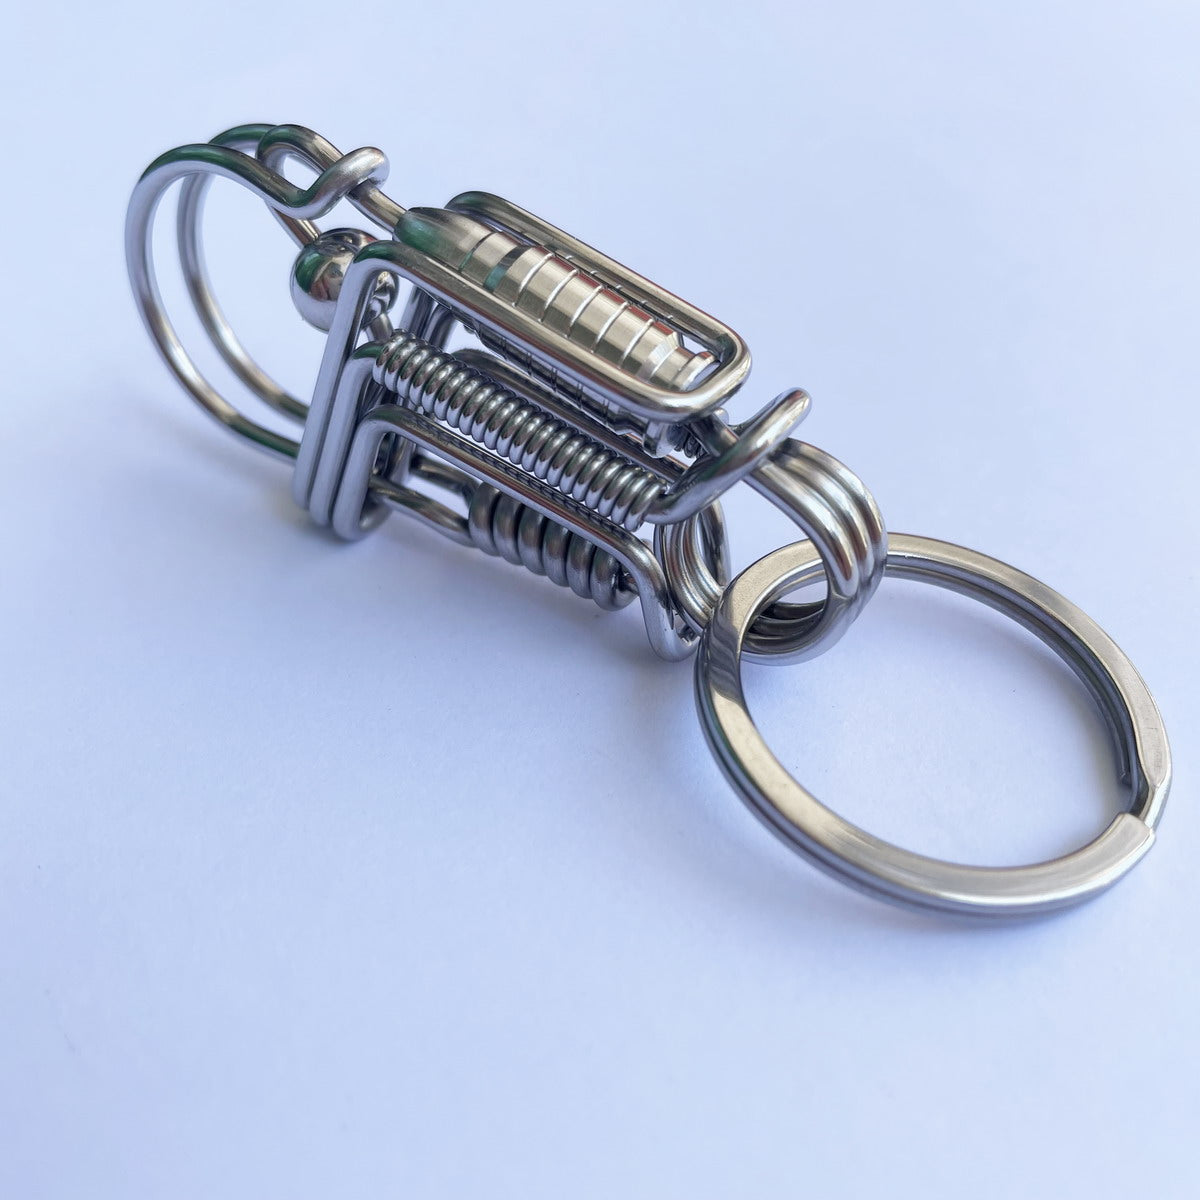 Minimalist Beads Wire Wrapped Stainless Steel Carabiner Keychain